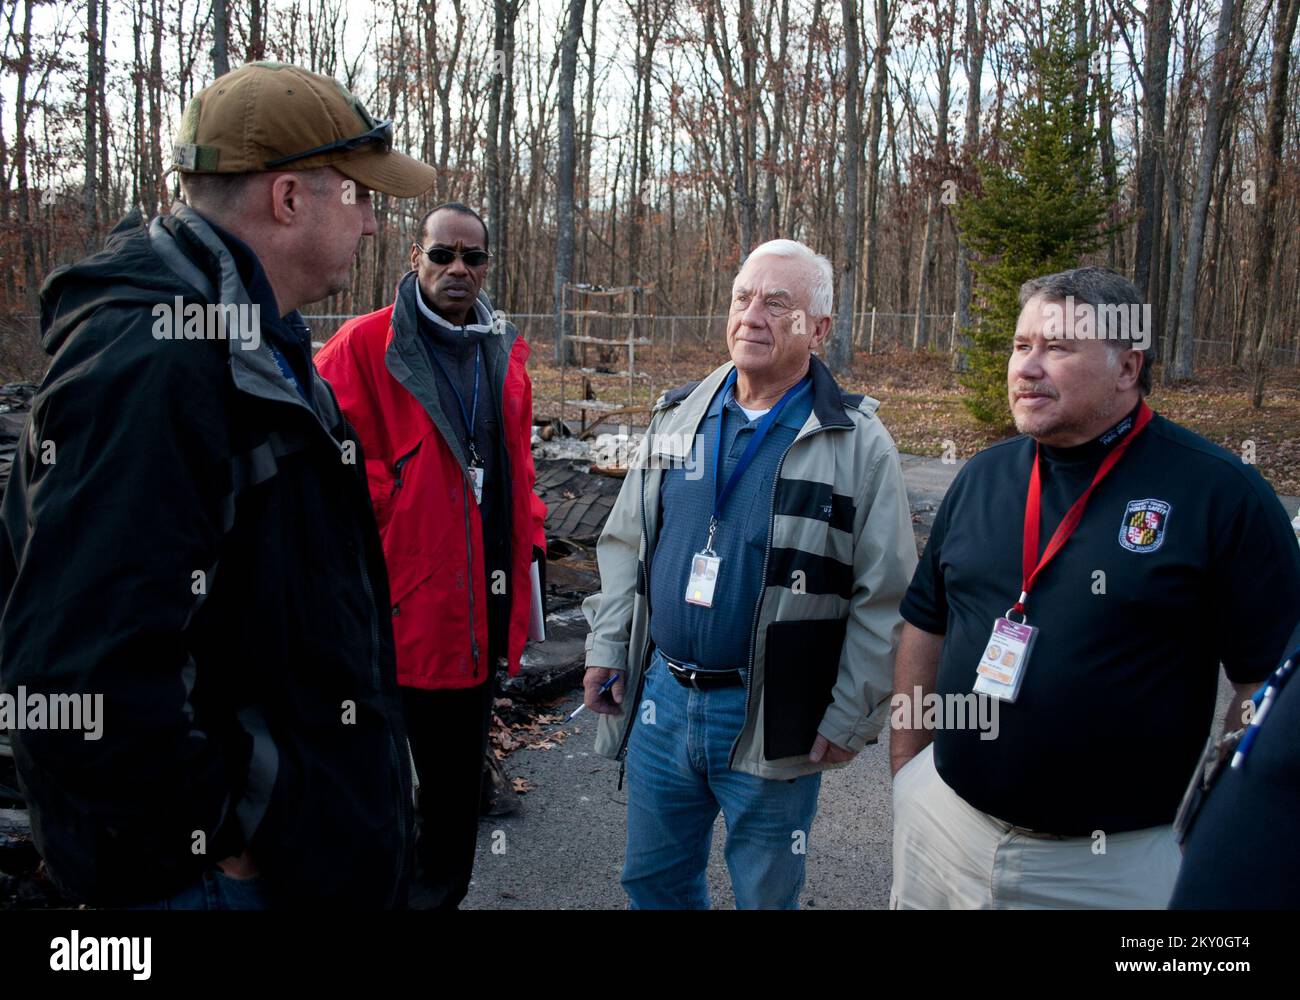 Oakland, Md., Nov. 15, 2012   (from left) James Taylor, FEMA Warren Adams, MD DHR, Duane Woodruff, Small Business Administration, and Brad Frantz, director of Garrett County Public Safety and Emergency Management, check a home that burned to the ground from Hurricane Sandy in Garrett County, MD. FEMA and county officials were assessing the effects from Hurricane Sandy in Oakland, MD, and Garrett County. Maryland Hurricane Sandy. Photographs Relating to Disasters and Emergency Management Programs, Activities, and Officials Stock Photo